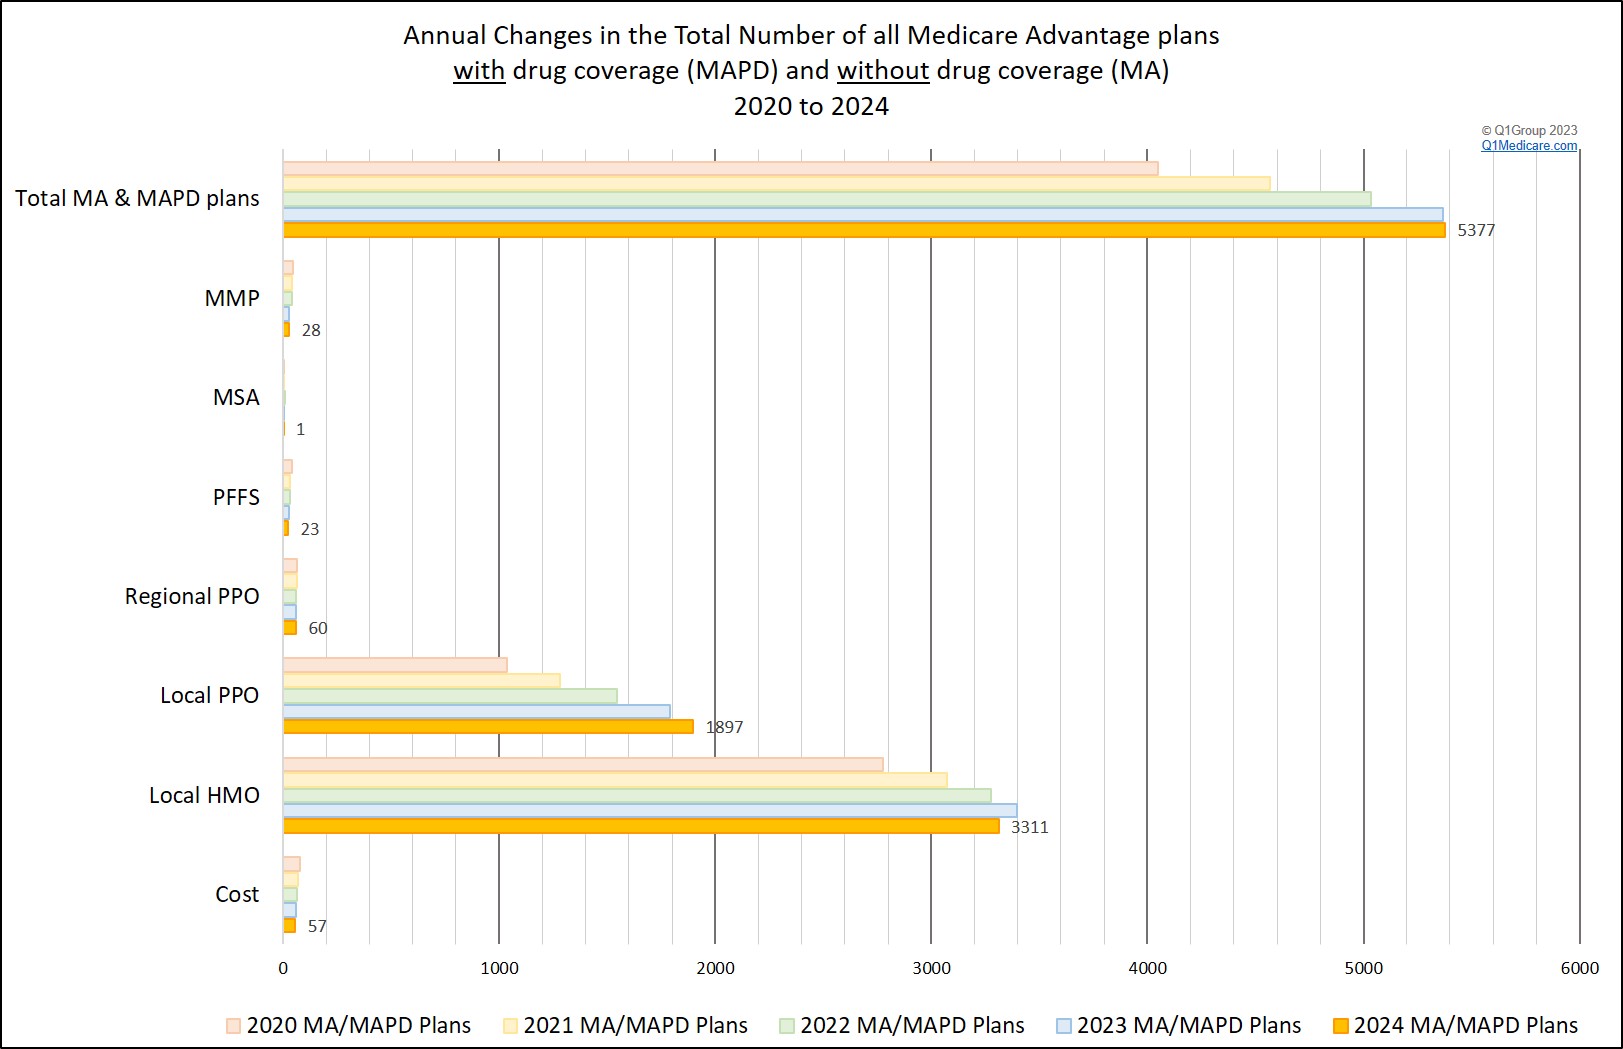 Total number of all Medicare Advantage plans available